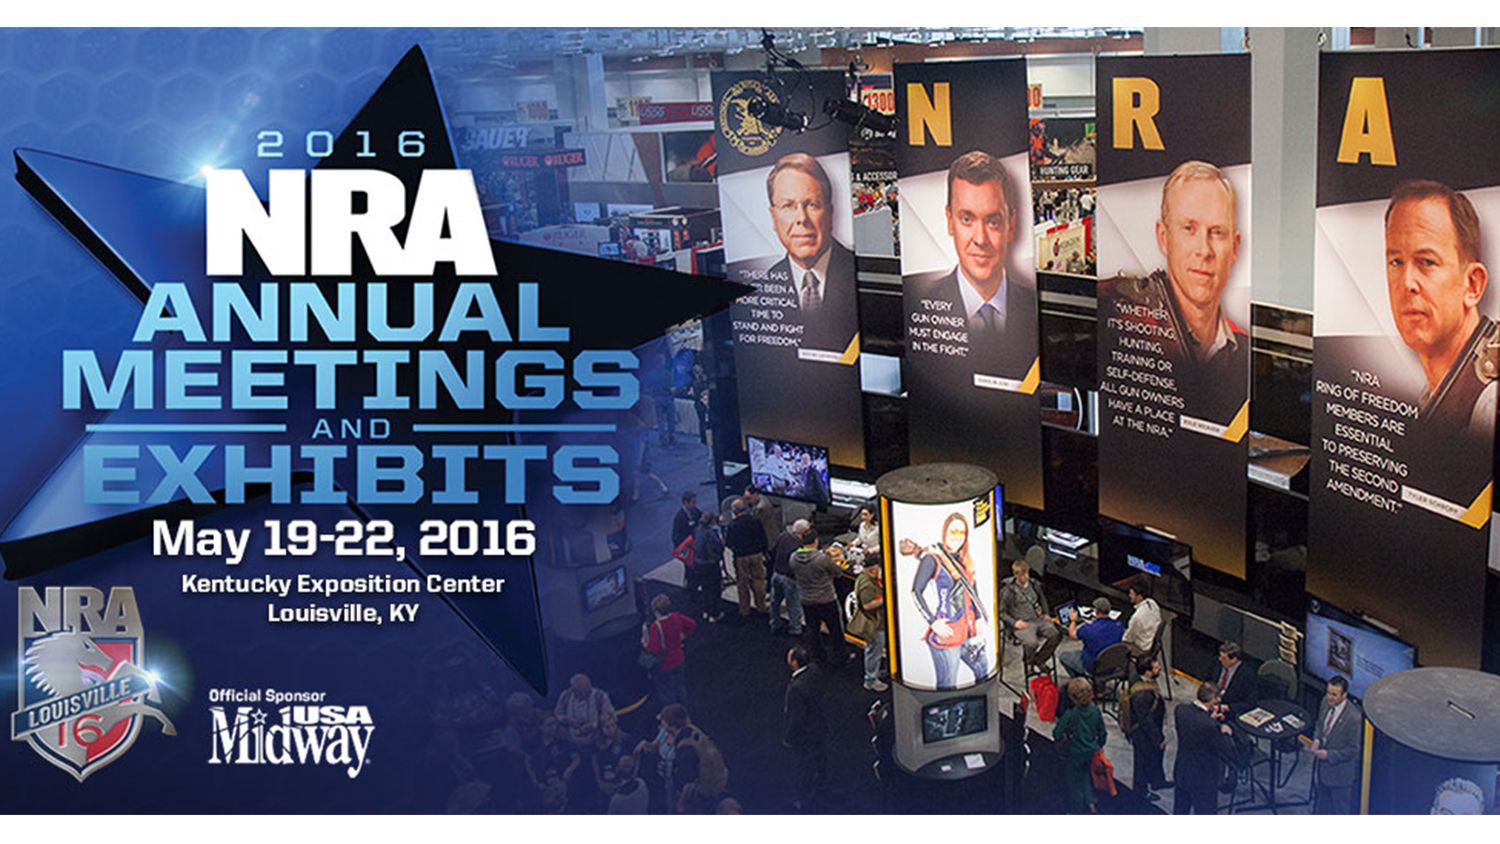 NRA Annual Meeting Events: Friday May 20th